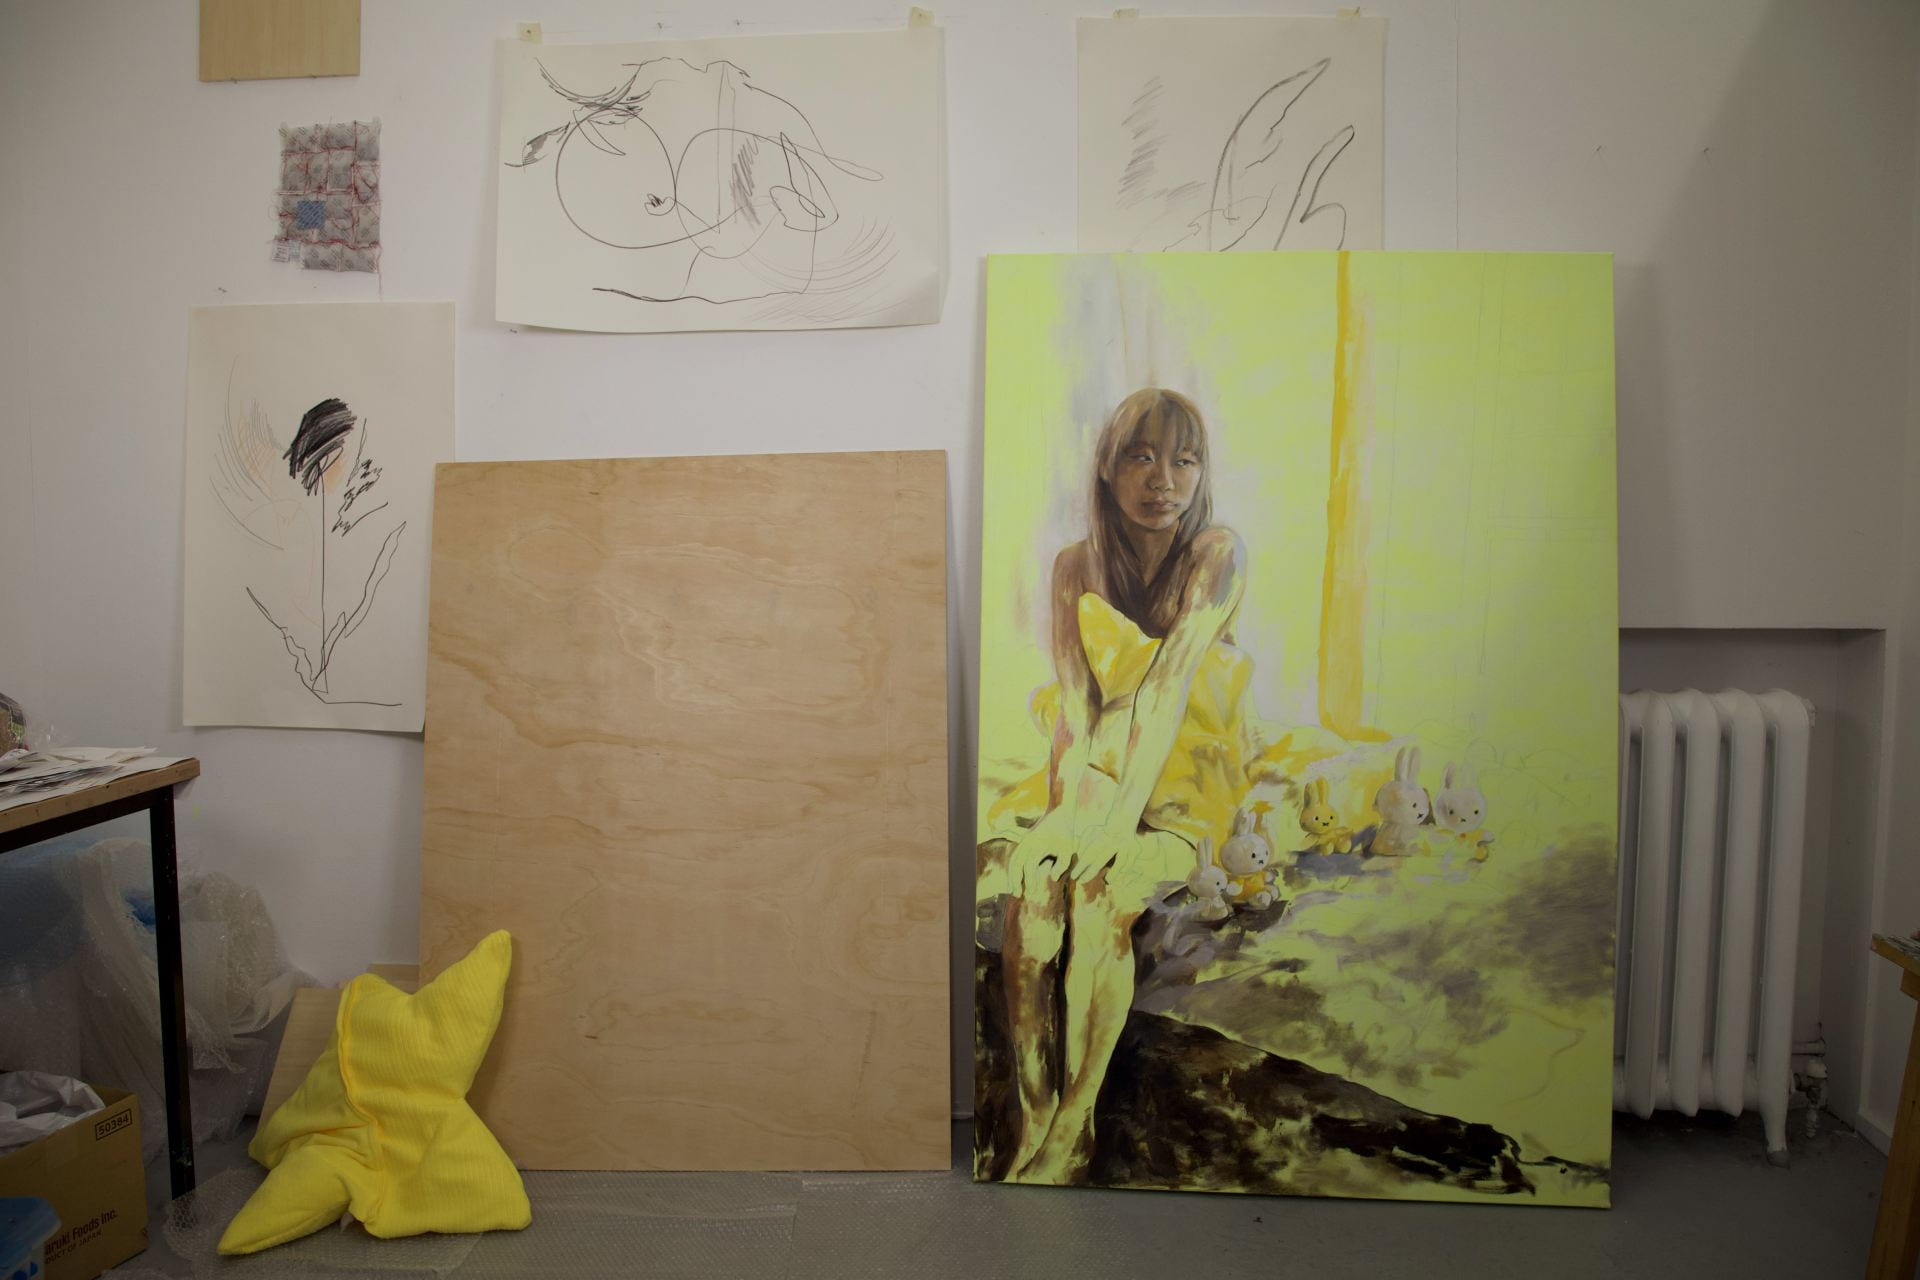 A view of the artists' studio. In the centre of the image there is a yellow painting of girl in wood next to a large panel of wood.